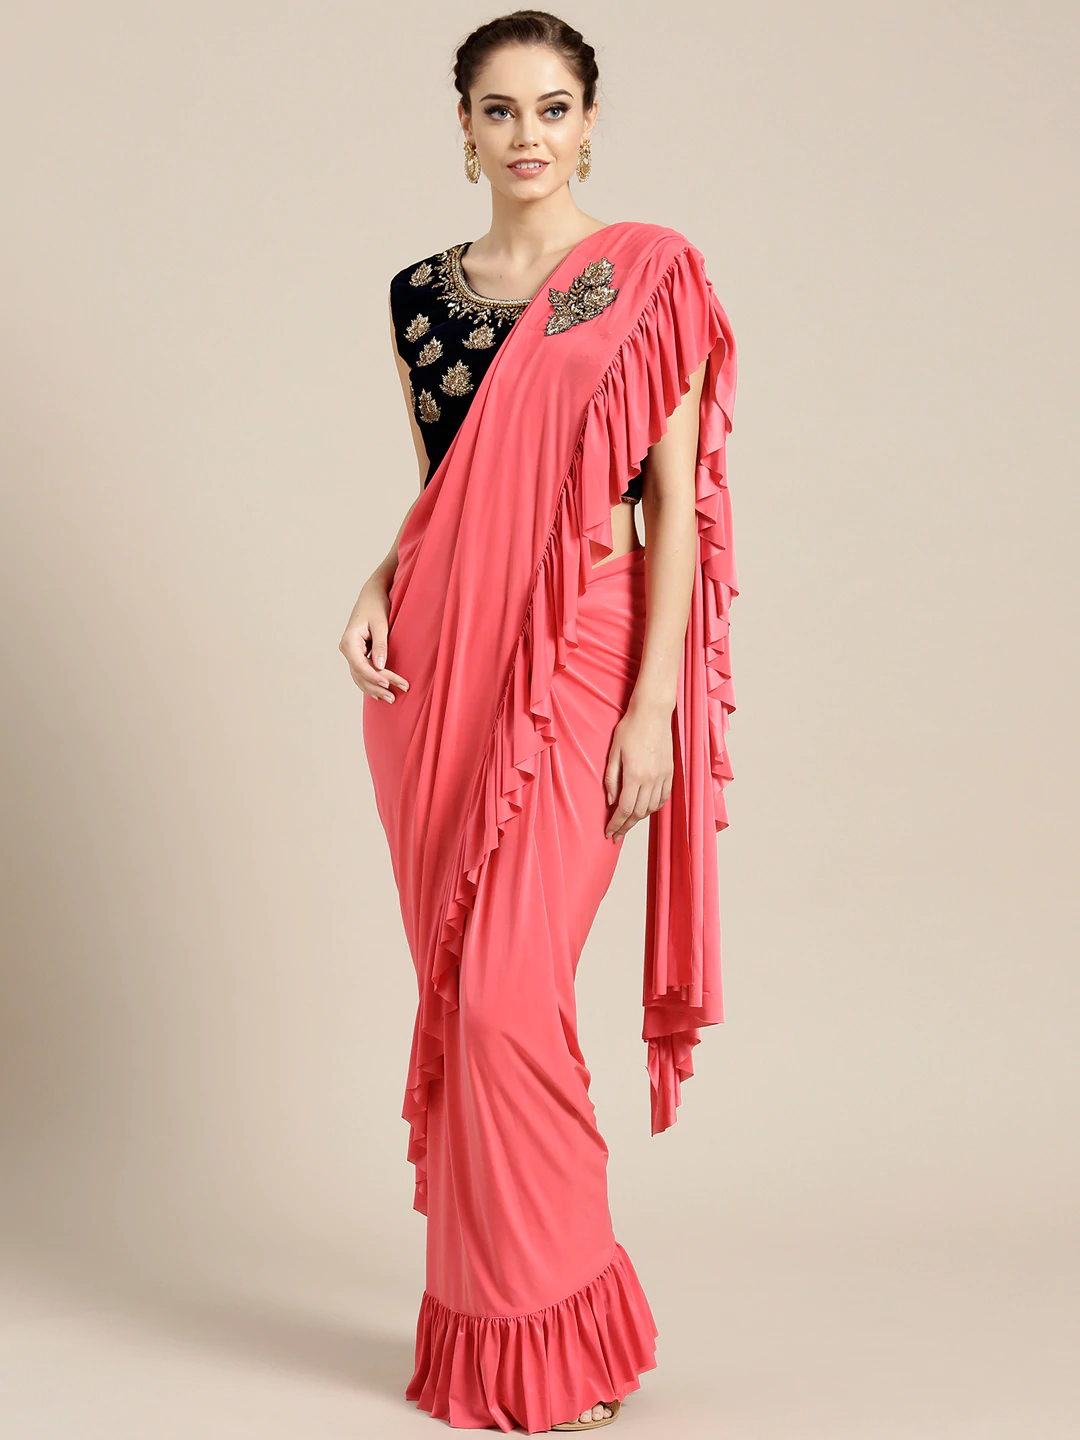 Draped Ruffled Pre-stitched Saree with Embellished Velvet Crystal-studded Blouse